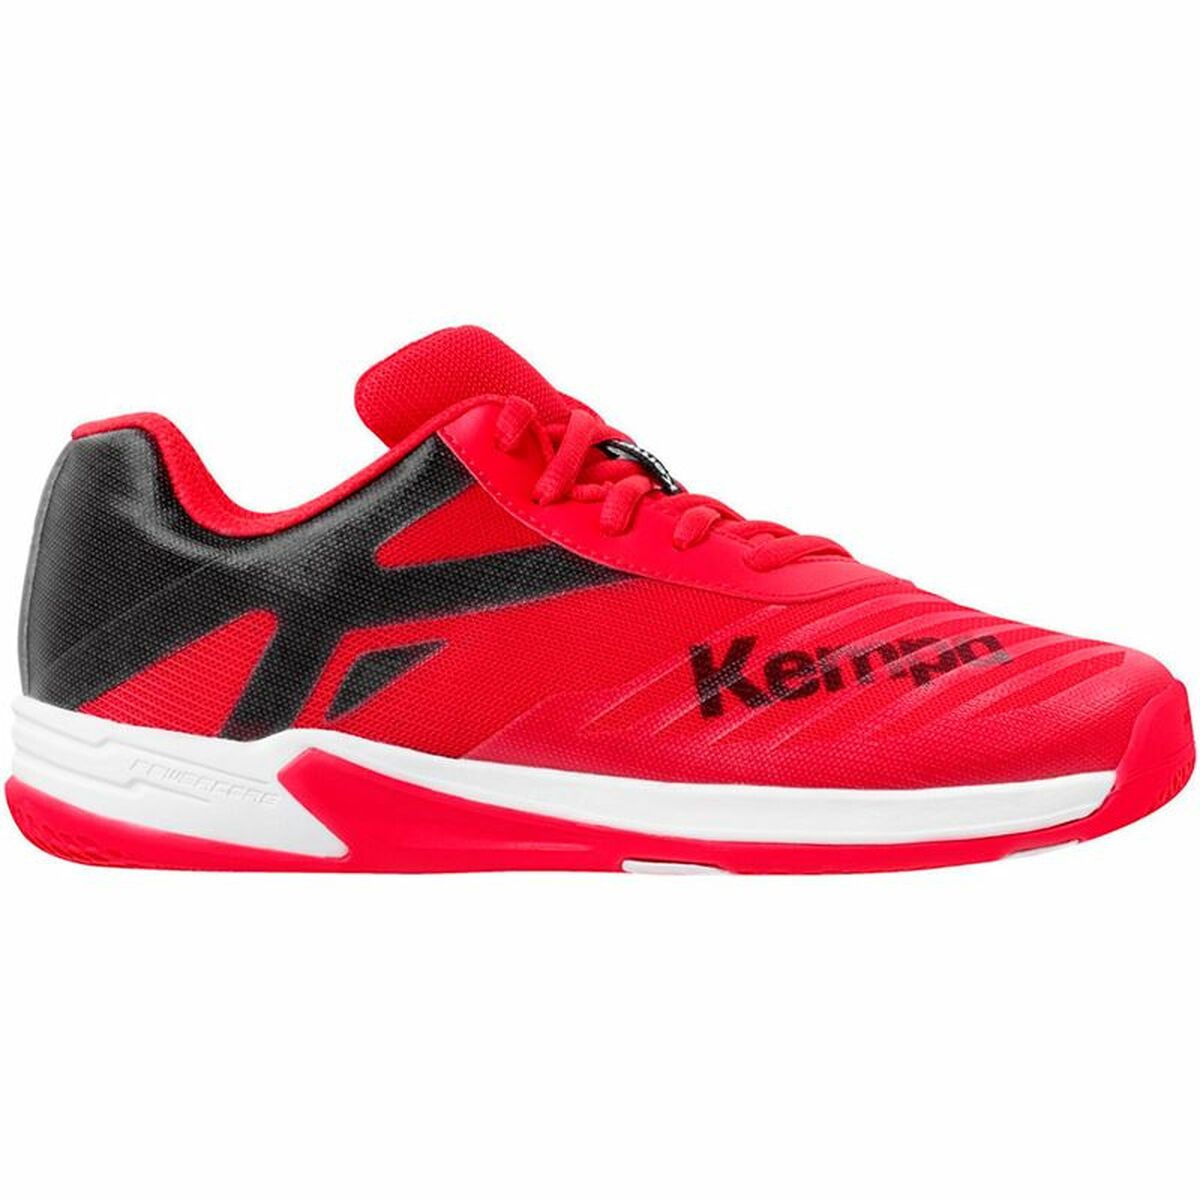 Sports Shoes for Kids Kempa Wing 2.0 Red